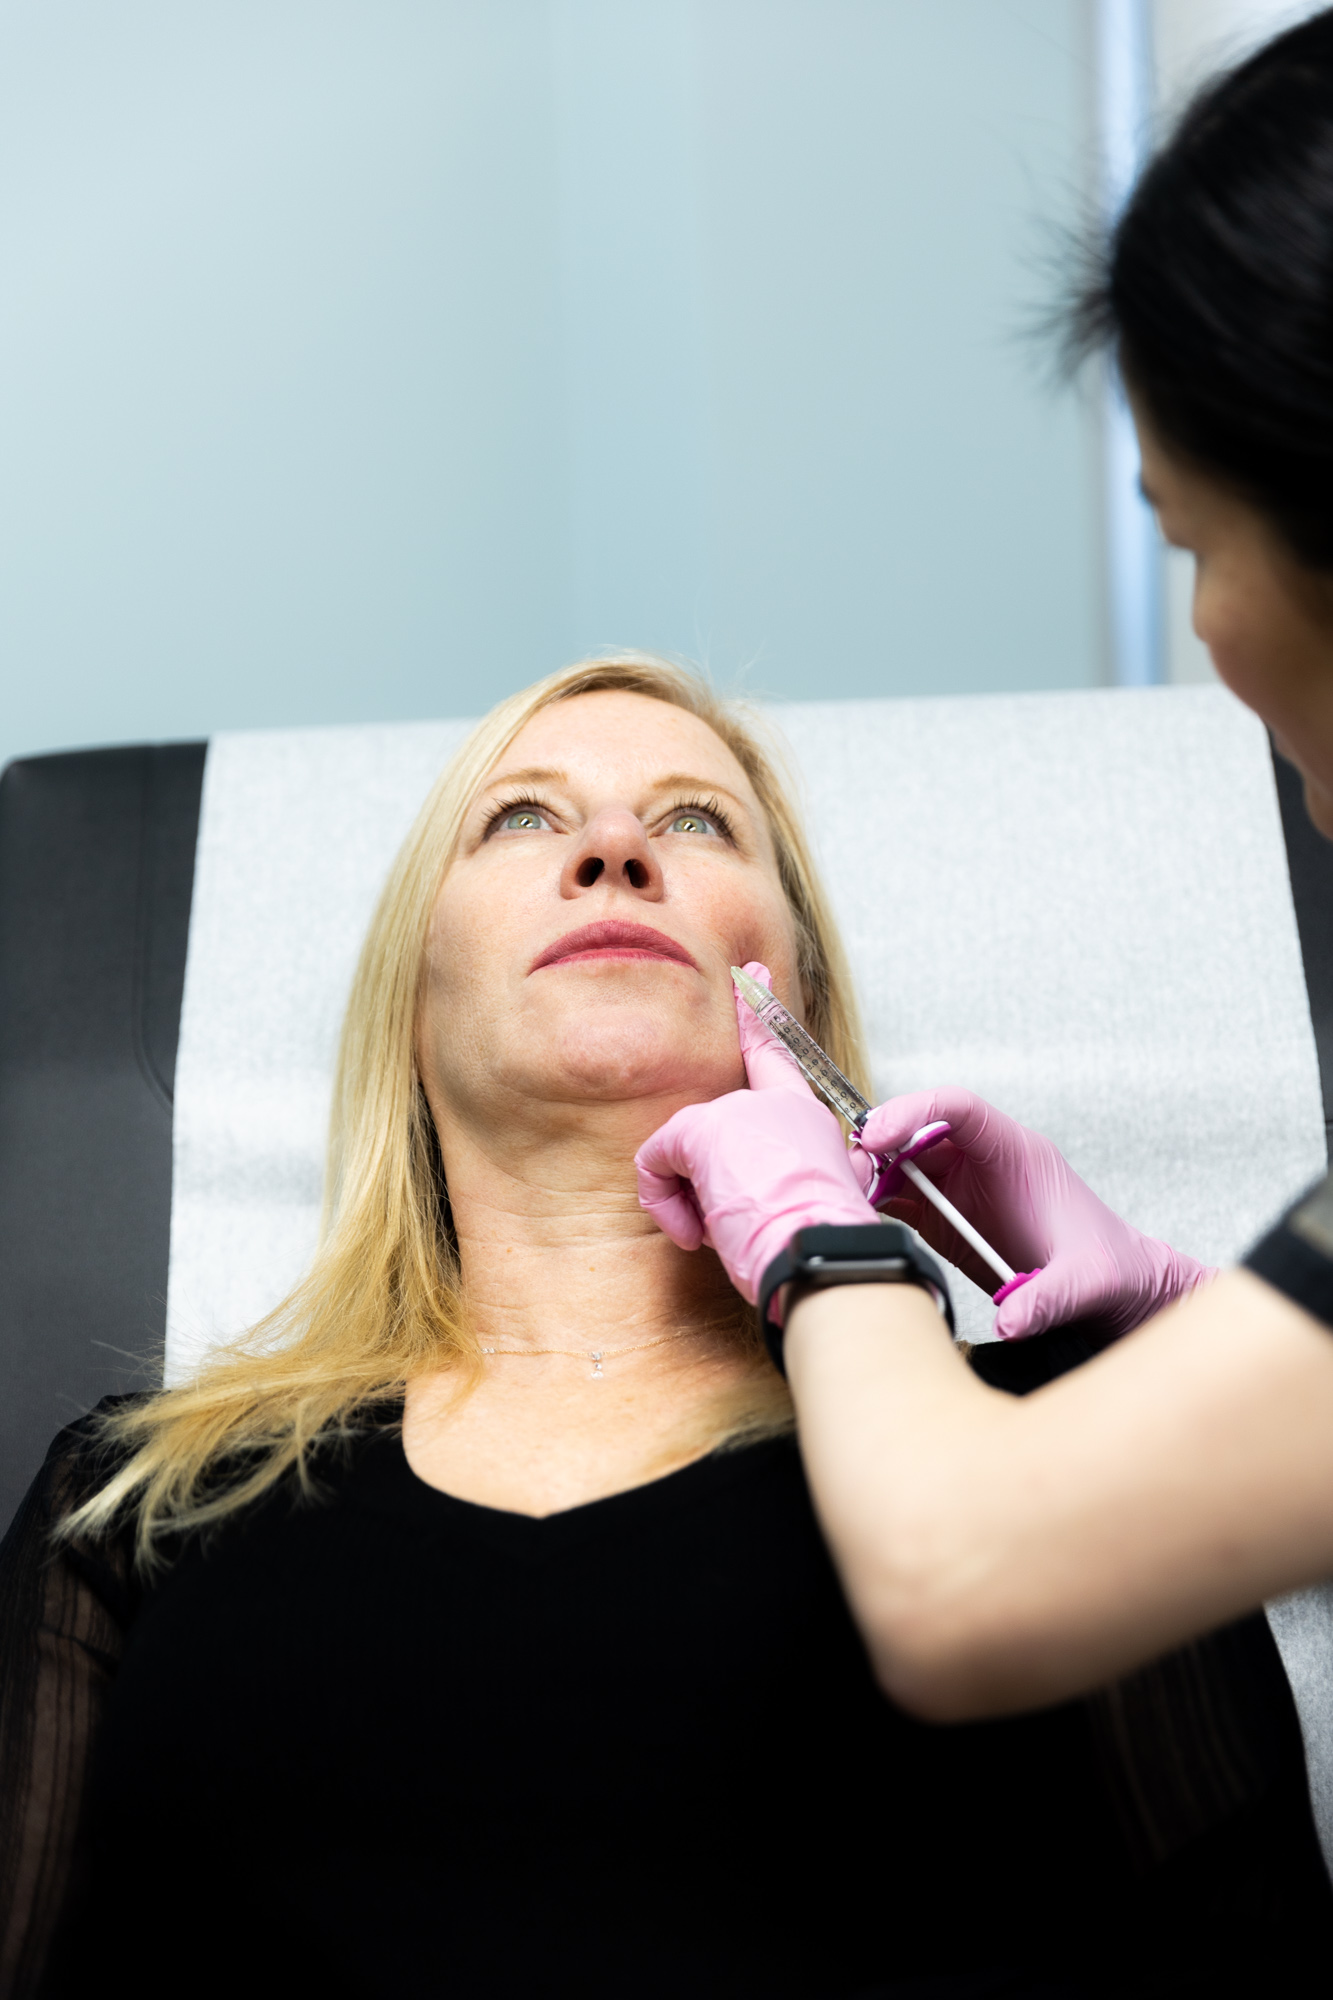 A Kansas City Skin and Cancer Center doctor begins to inject filler into a female patient's left cheek. Patient is reclining back and looking up.